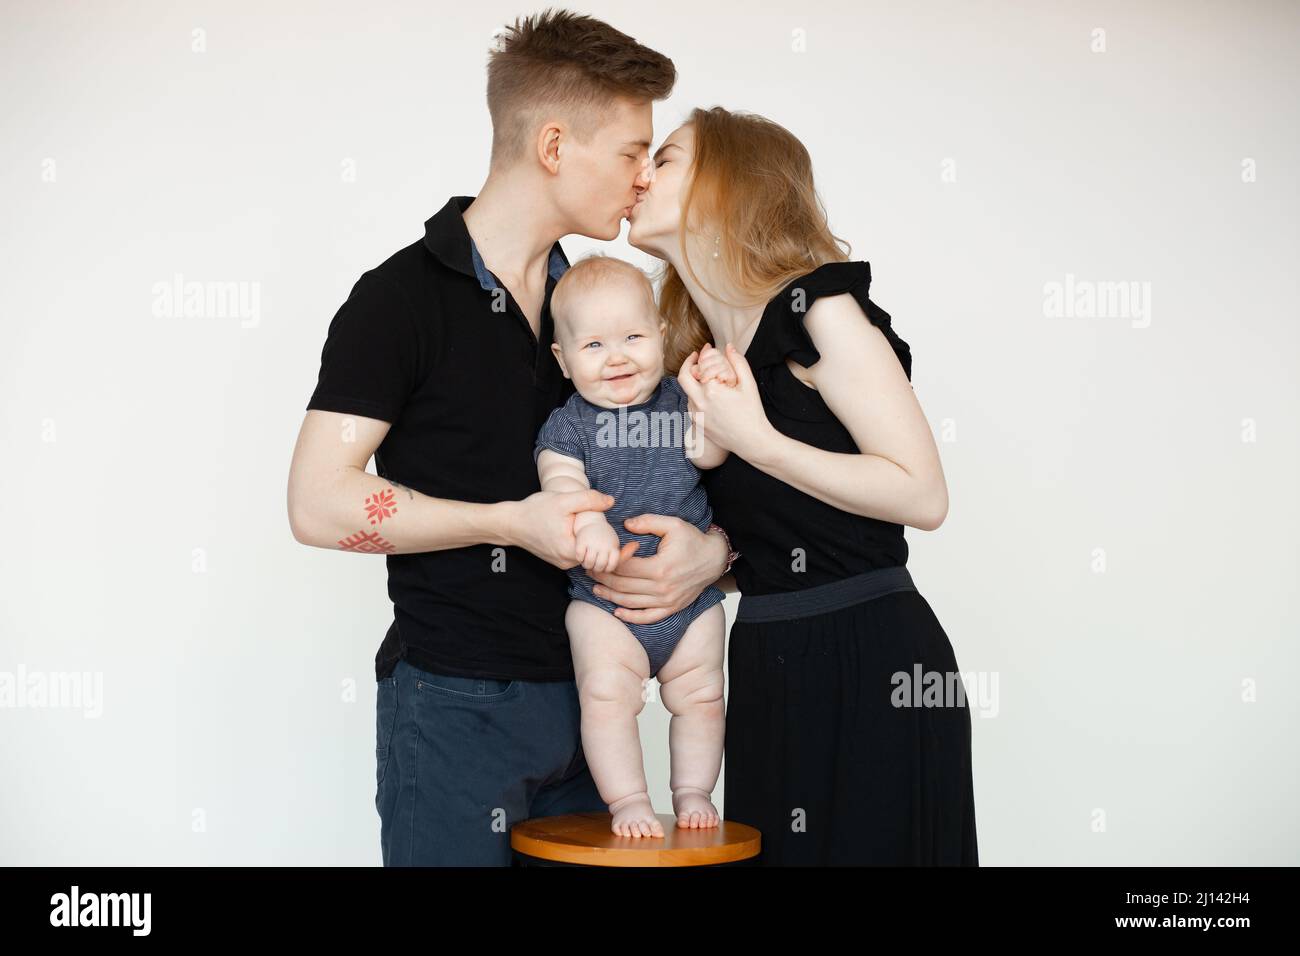 Portrait of smiling calm family, woman, man, baby, hugging, spending time together. Celebration of anniversary marriage Stock Photo